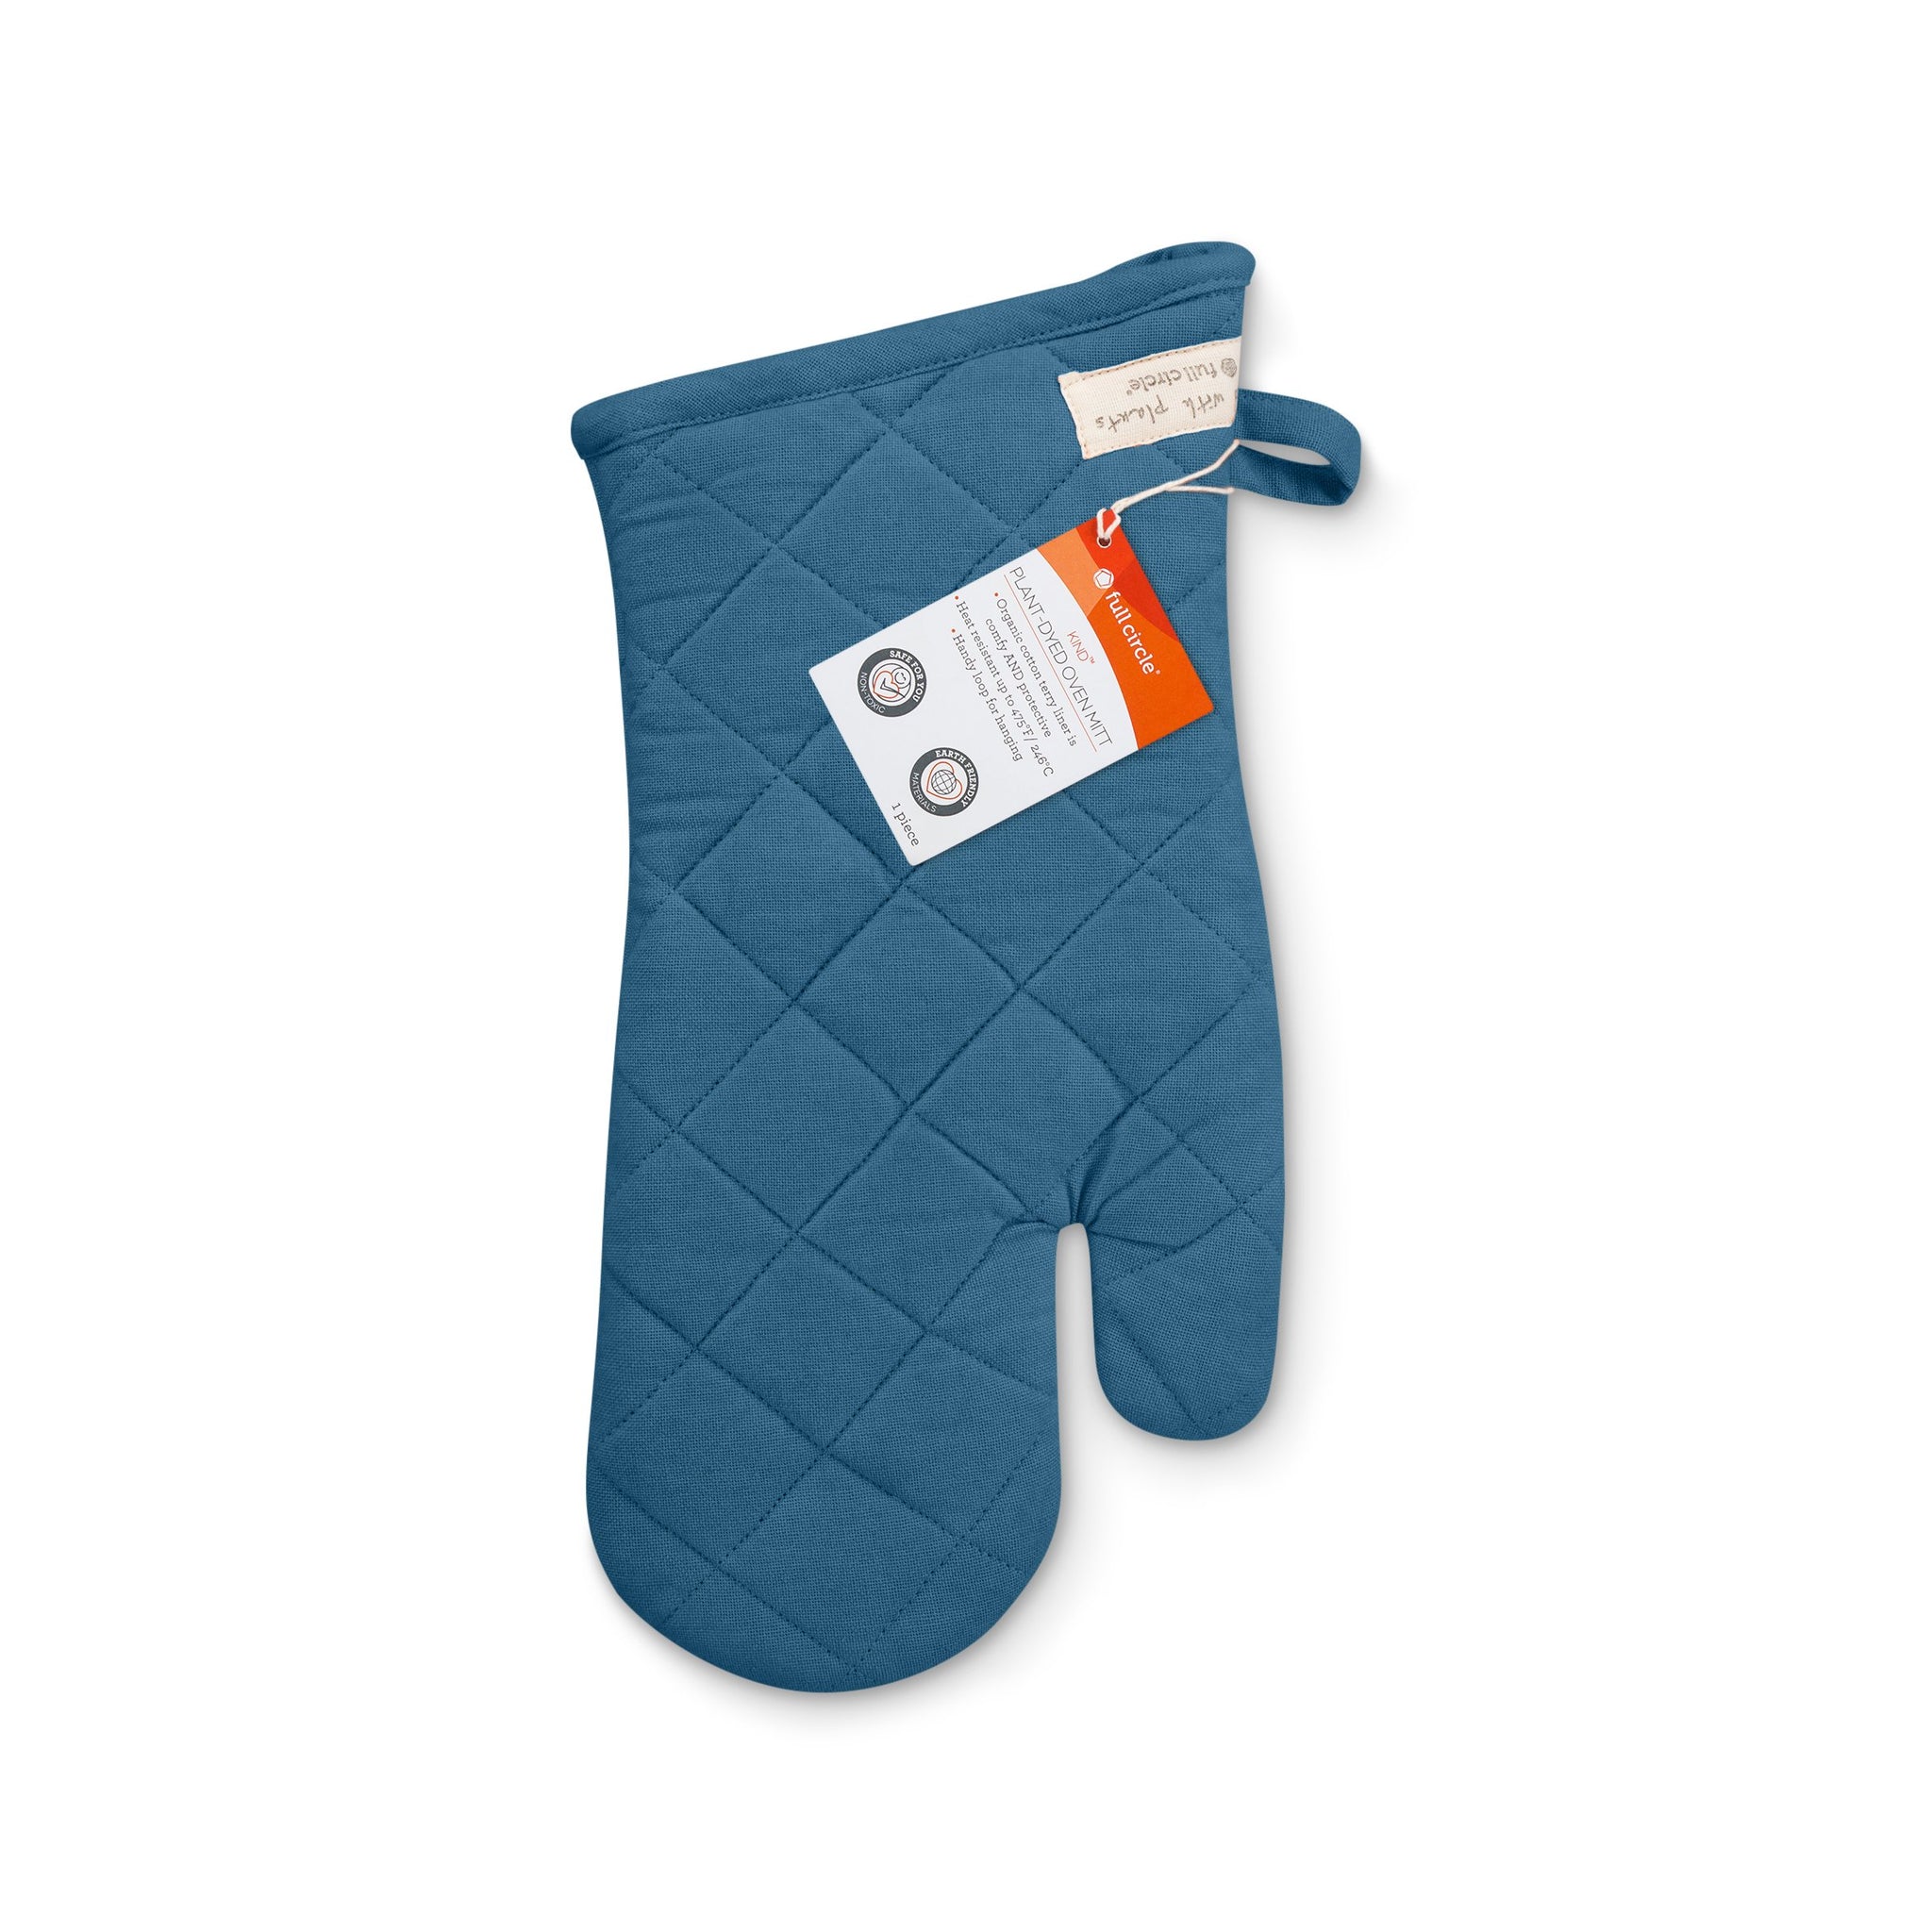 Made from Scratch Oven Mitt from Blue Q – Urban General Store